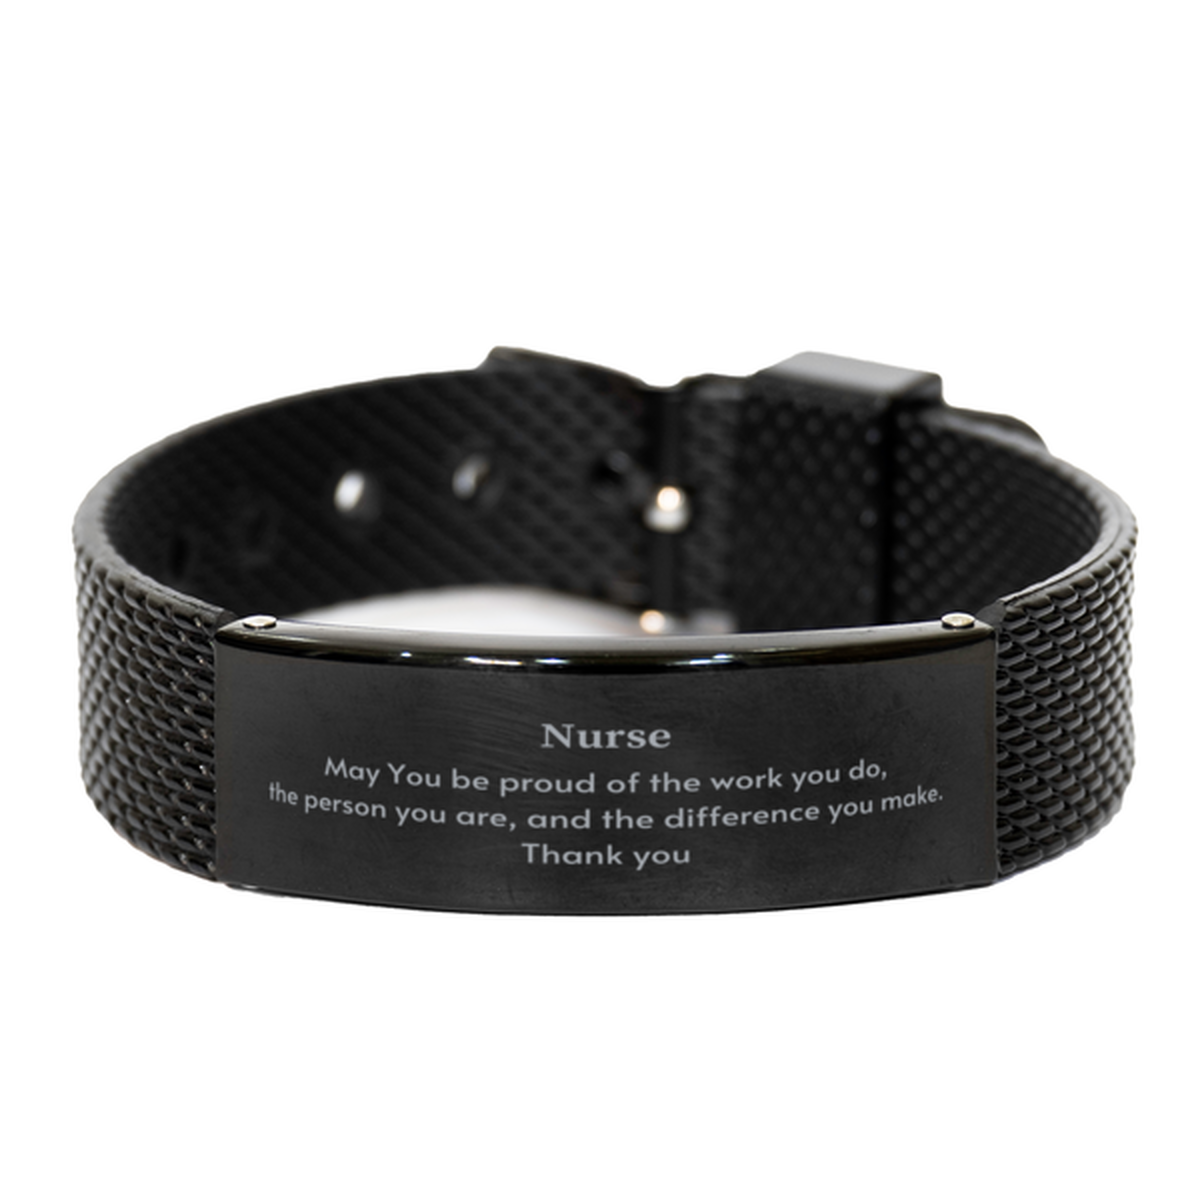 Heartwarming Black Shark Mesh Bracelet Retirement Coworkers Gifts for Nurse, Nurse May You be proud of the work you do, the person you are Gifts for Boss Men Women Friends